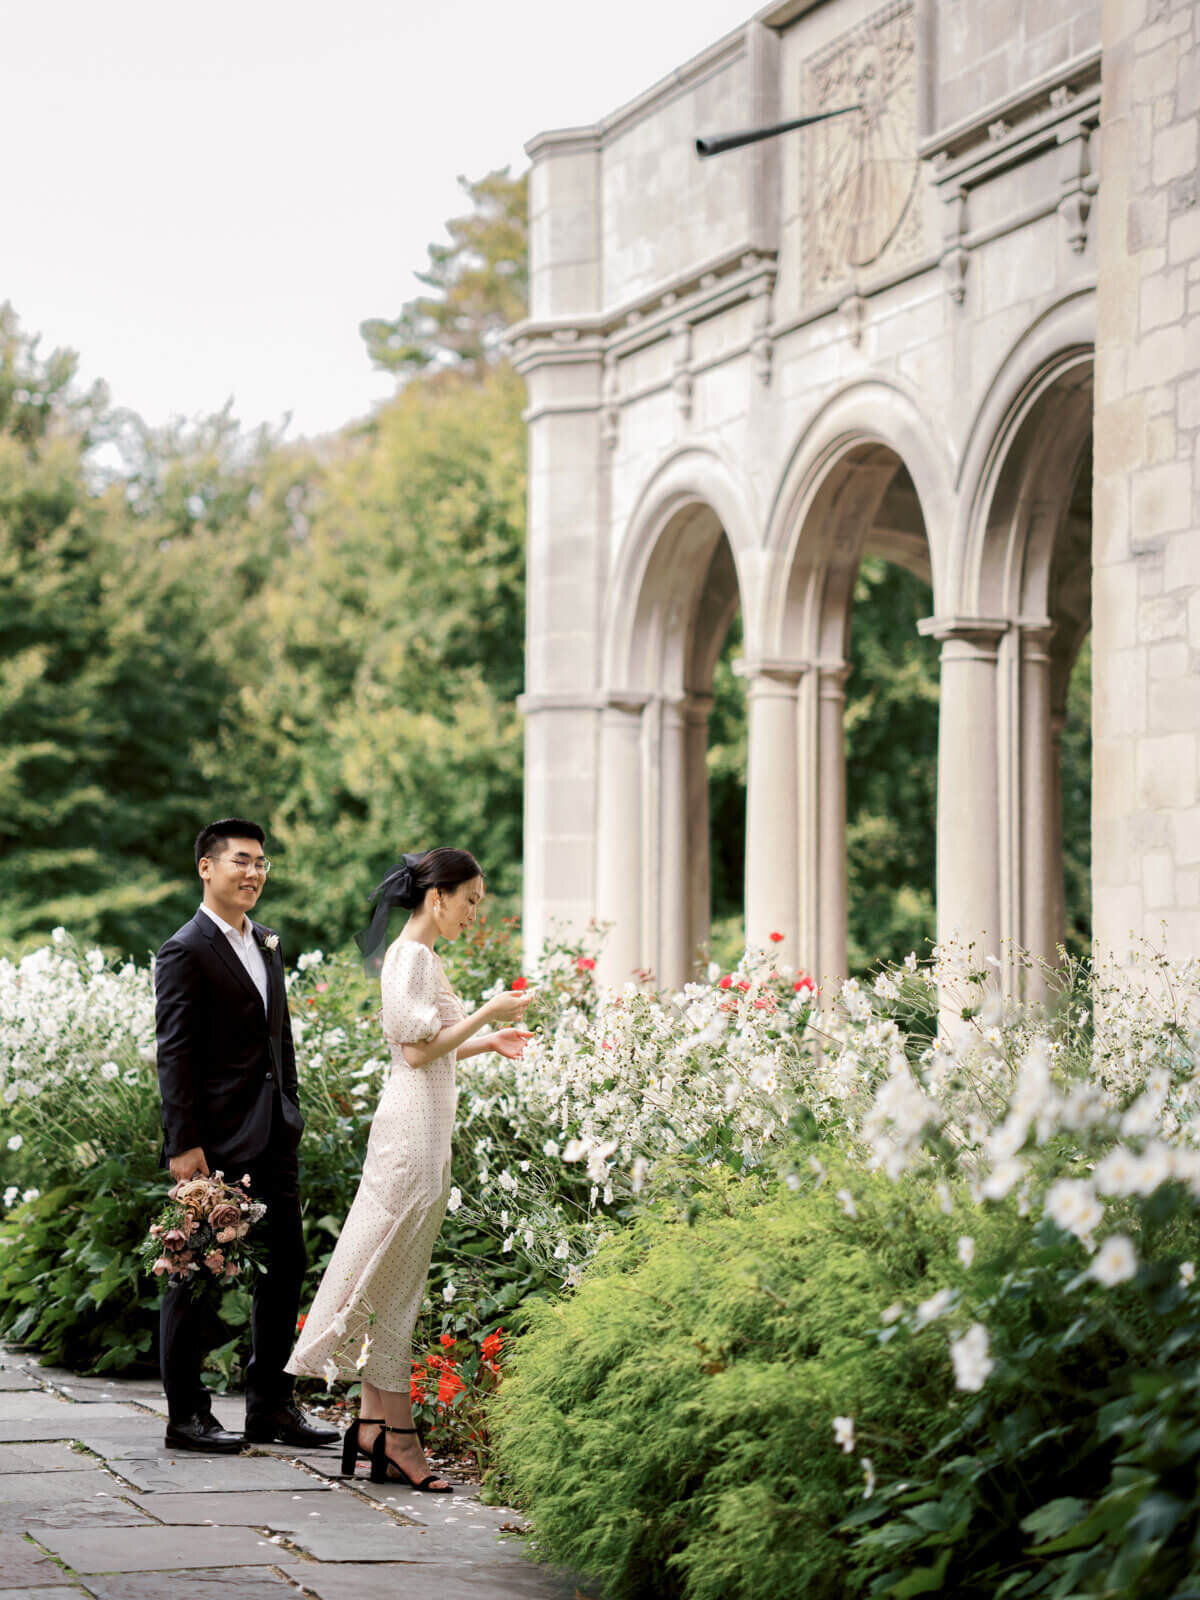 The engaged couple is gazing at the beautiful flowers outside Coe Hall at Planting Fields Arboretum, NY. Image by Jenny Fu Studio